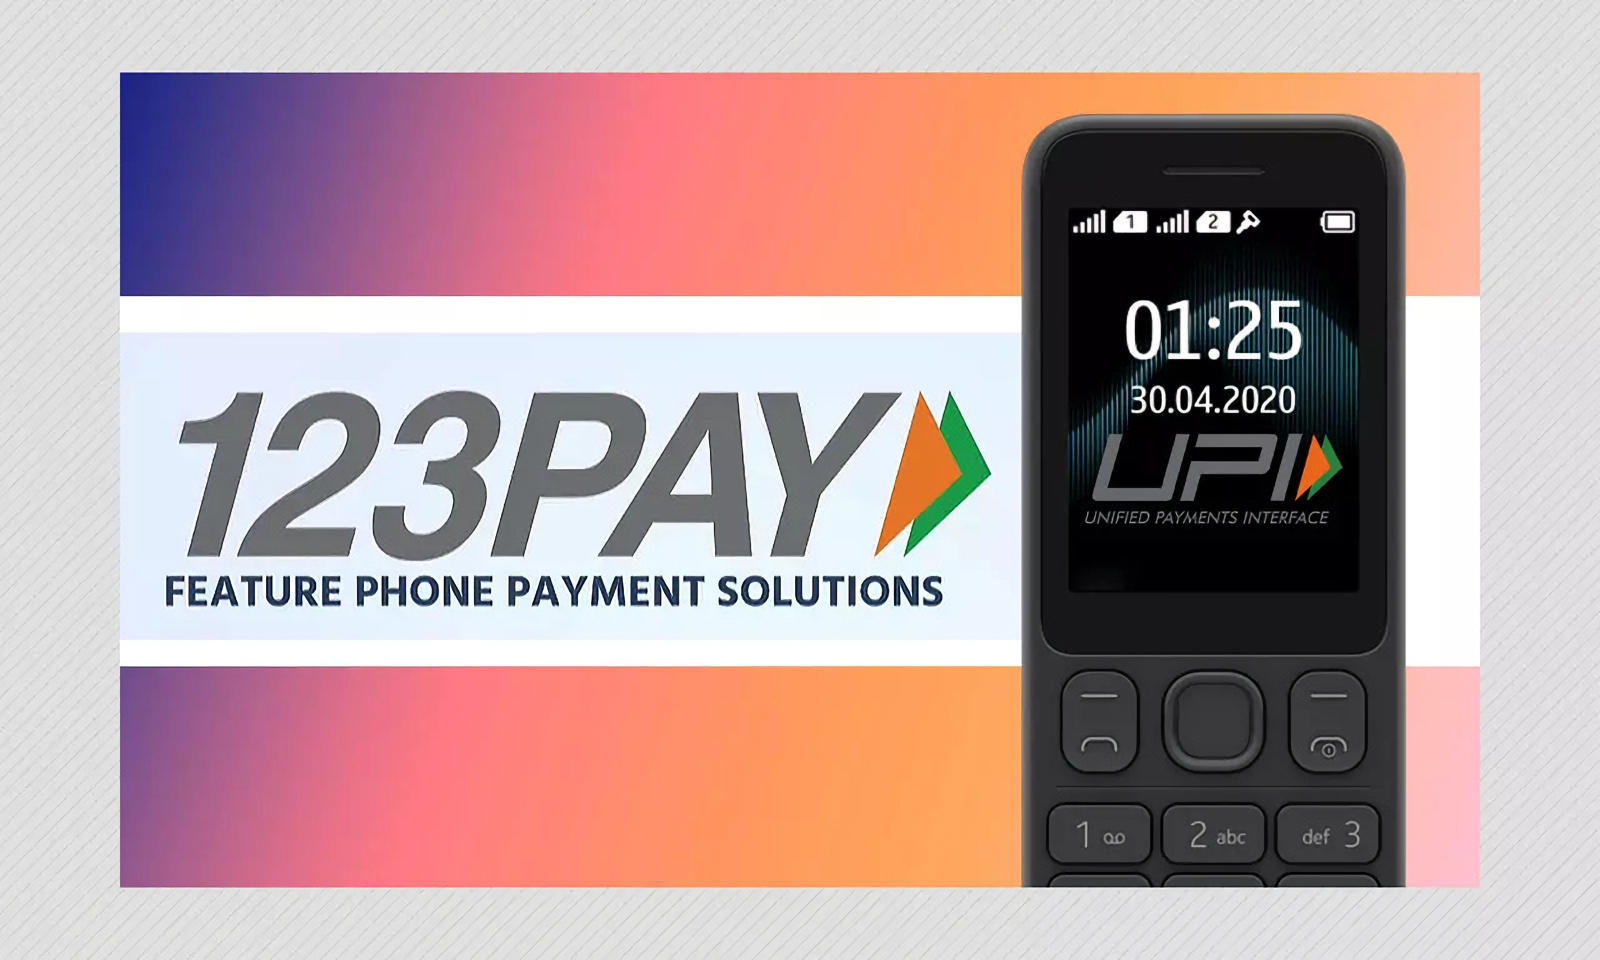 RBI launches UPI123pay for feature phones and DigiSaathi 2022